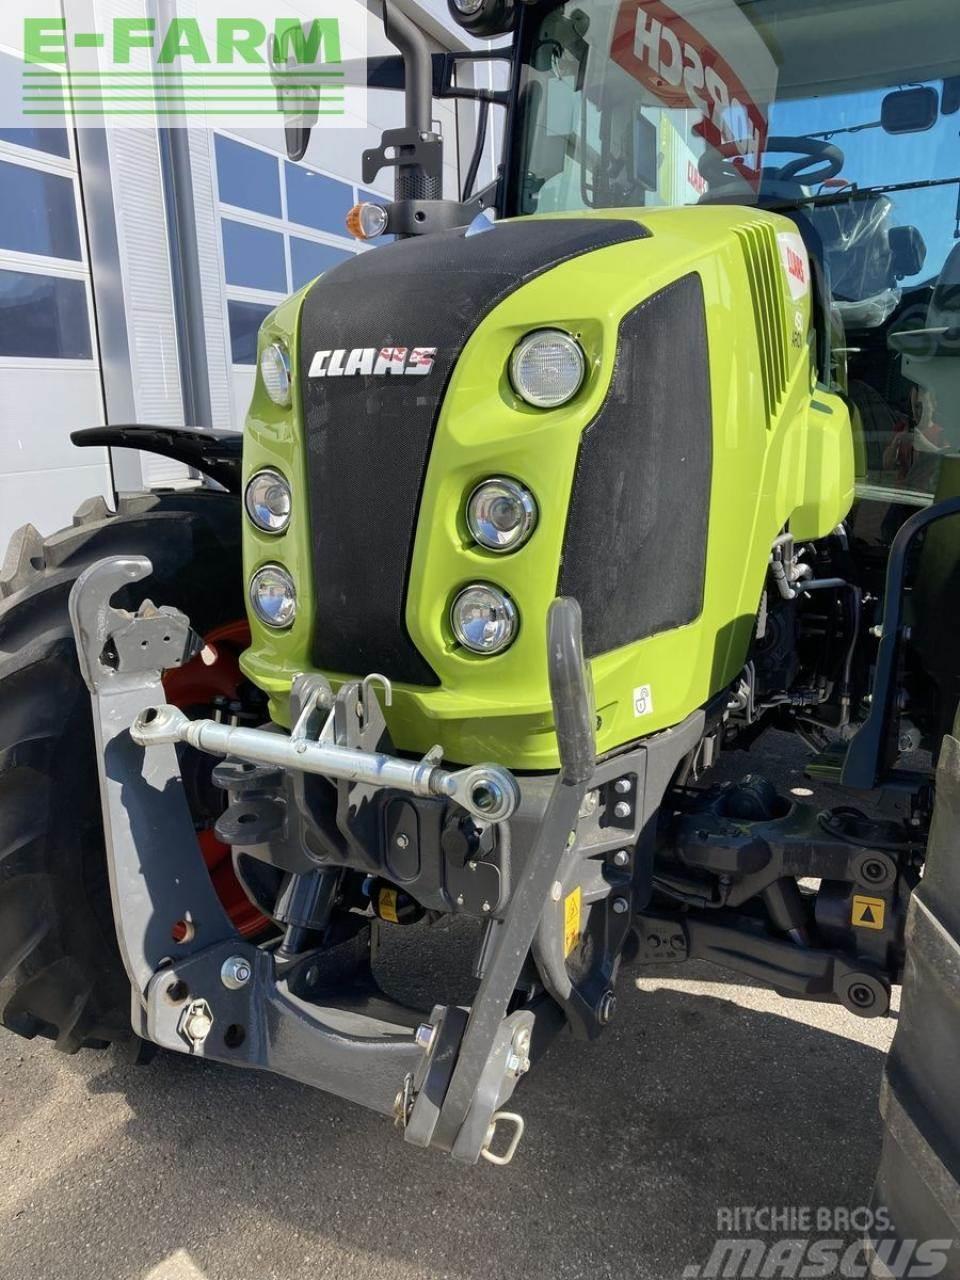 CLAAS arion 450 stage v (cis) Tractors